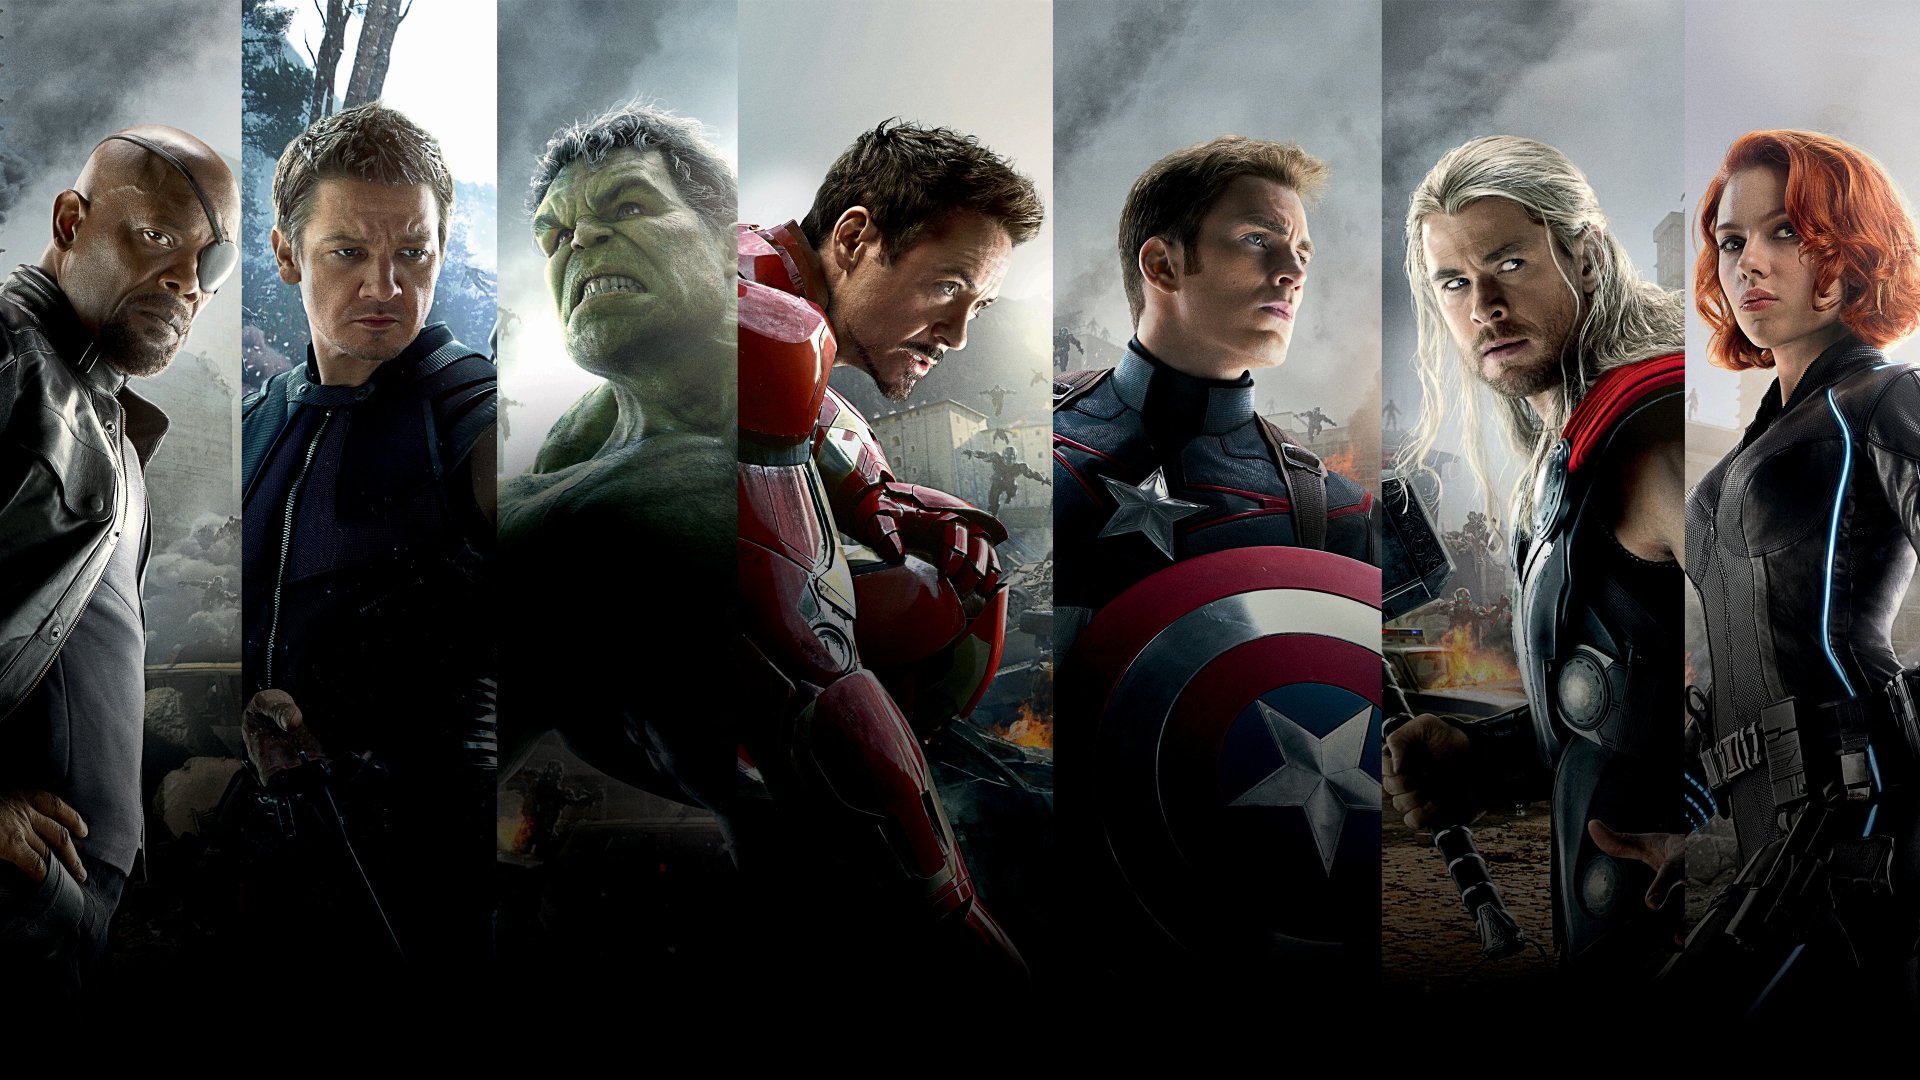 Avengers: Age of Ultron download the new version for mac